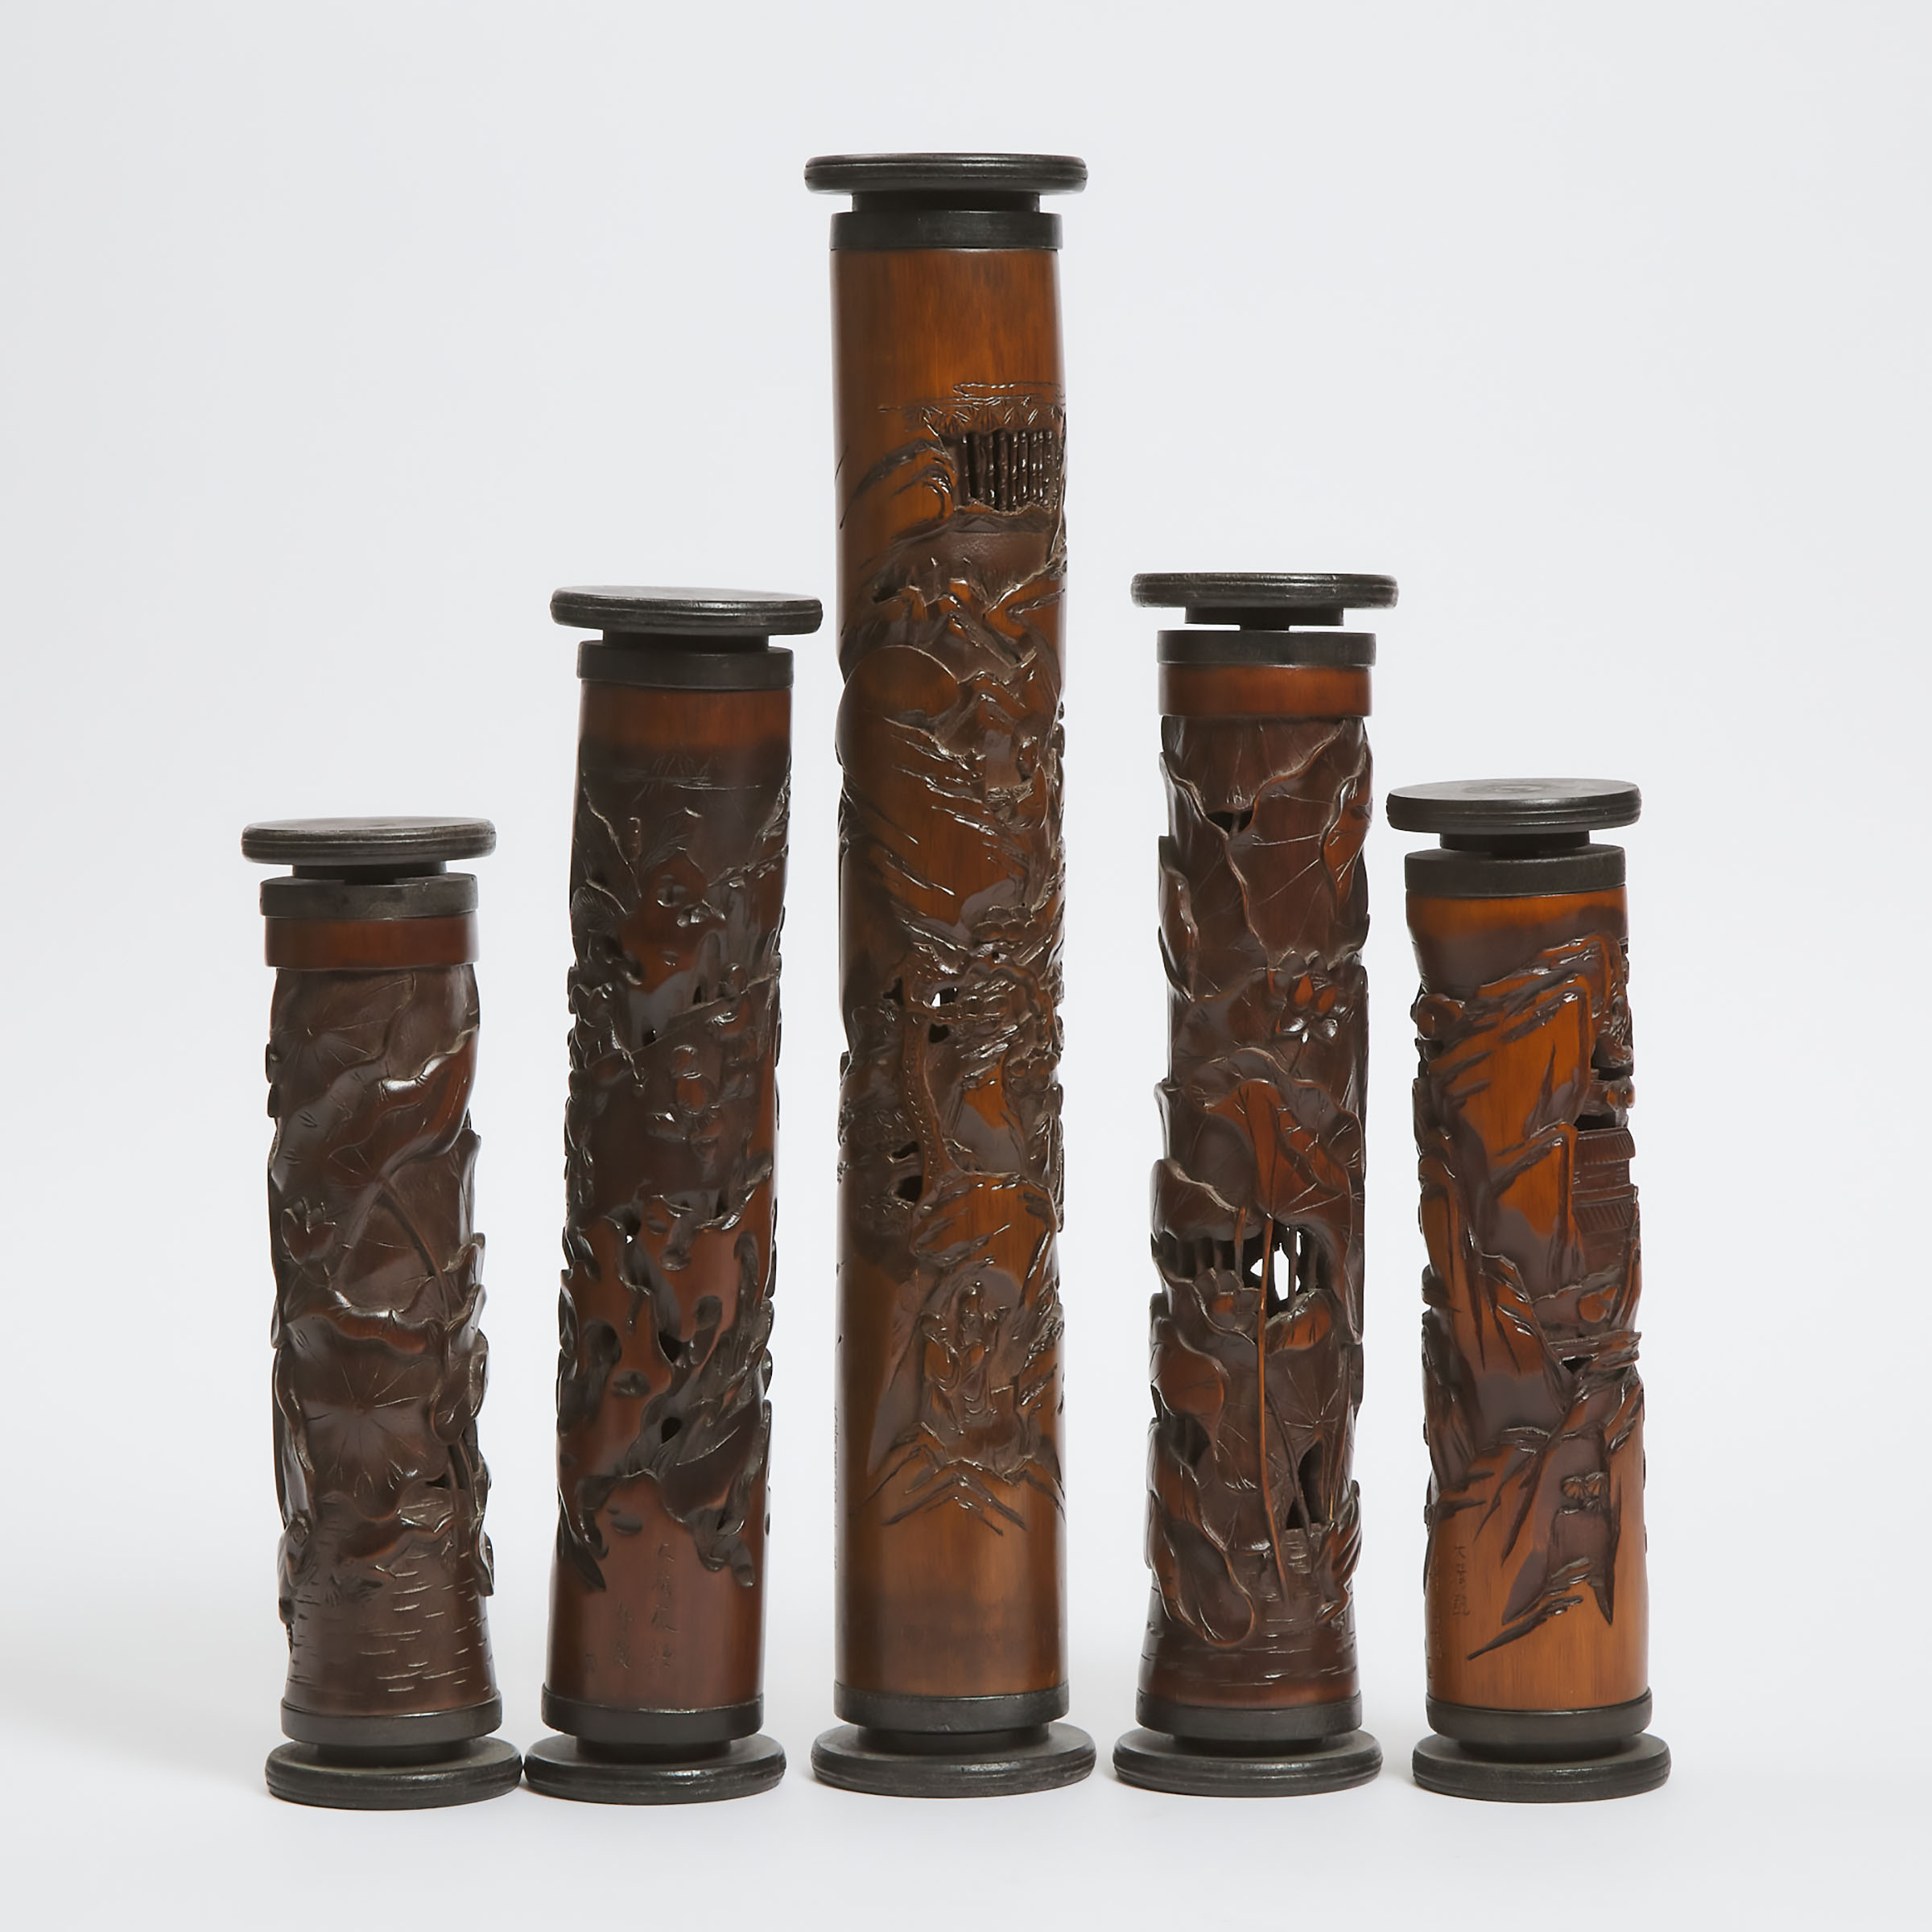 A Group of Five Carved Bamboo Incense Holders, Mid to Late 20th Century